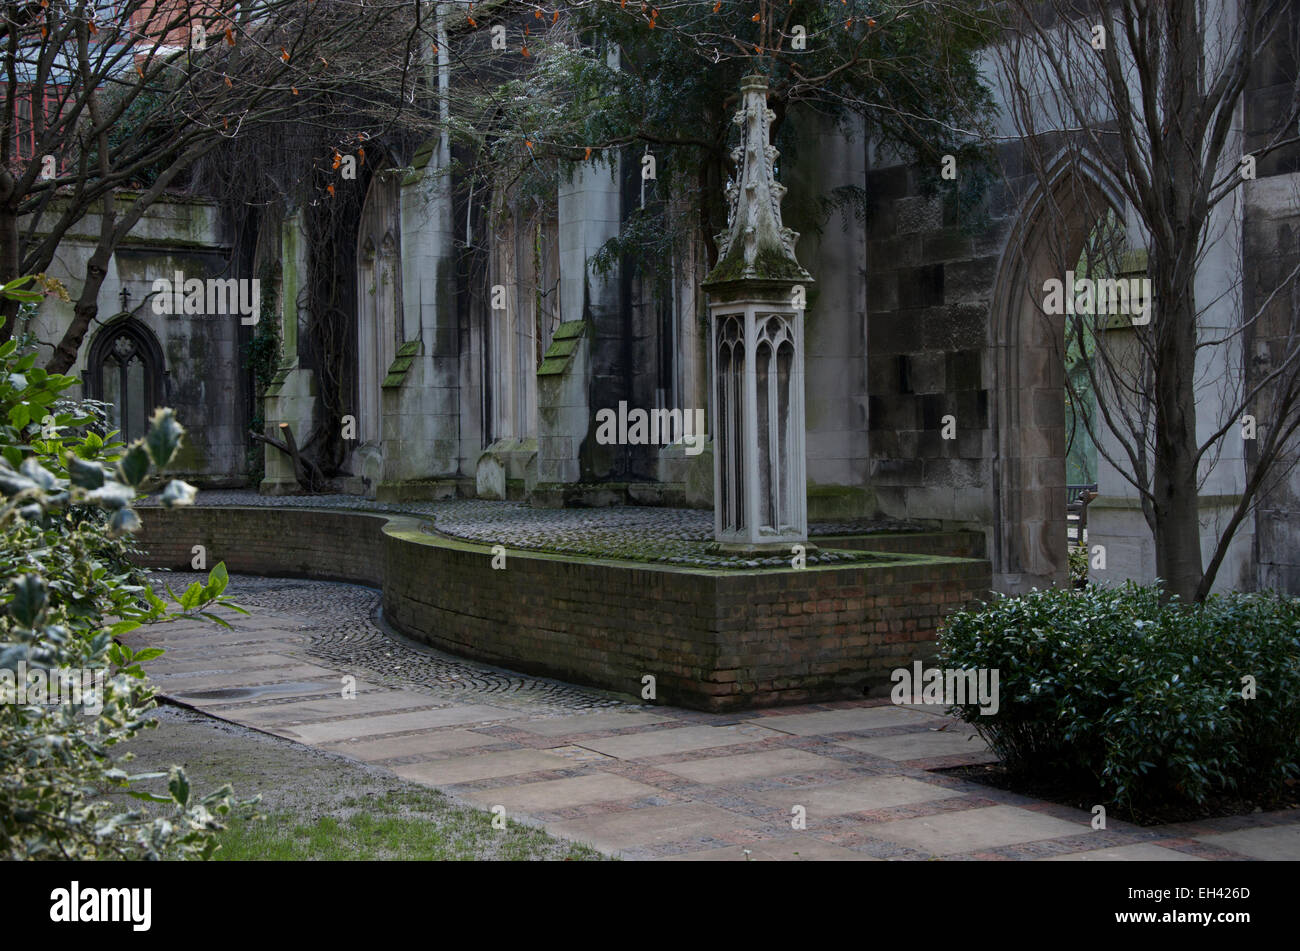 The ruins of St Dunstan in the East church in London and the garden within. Stock Photo